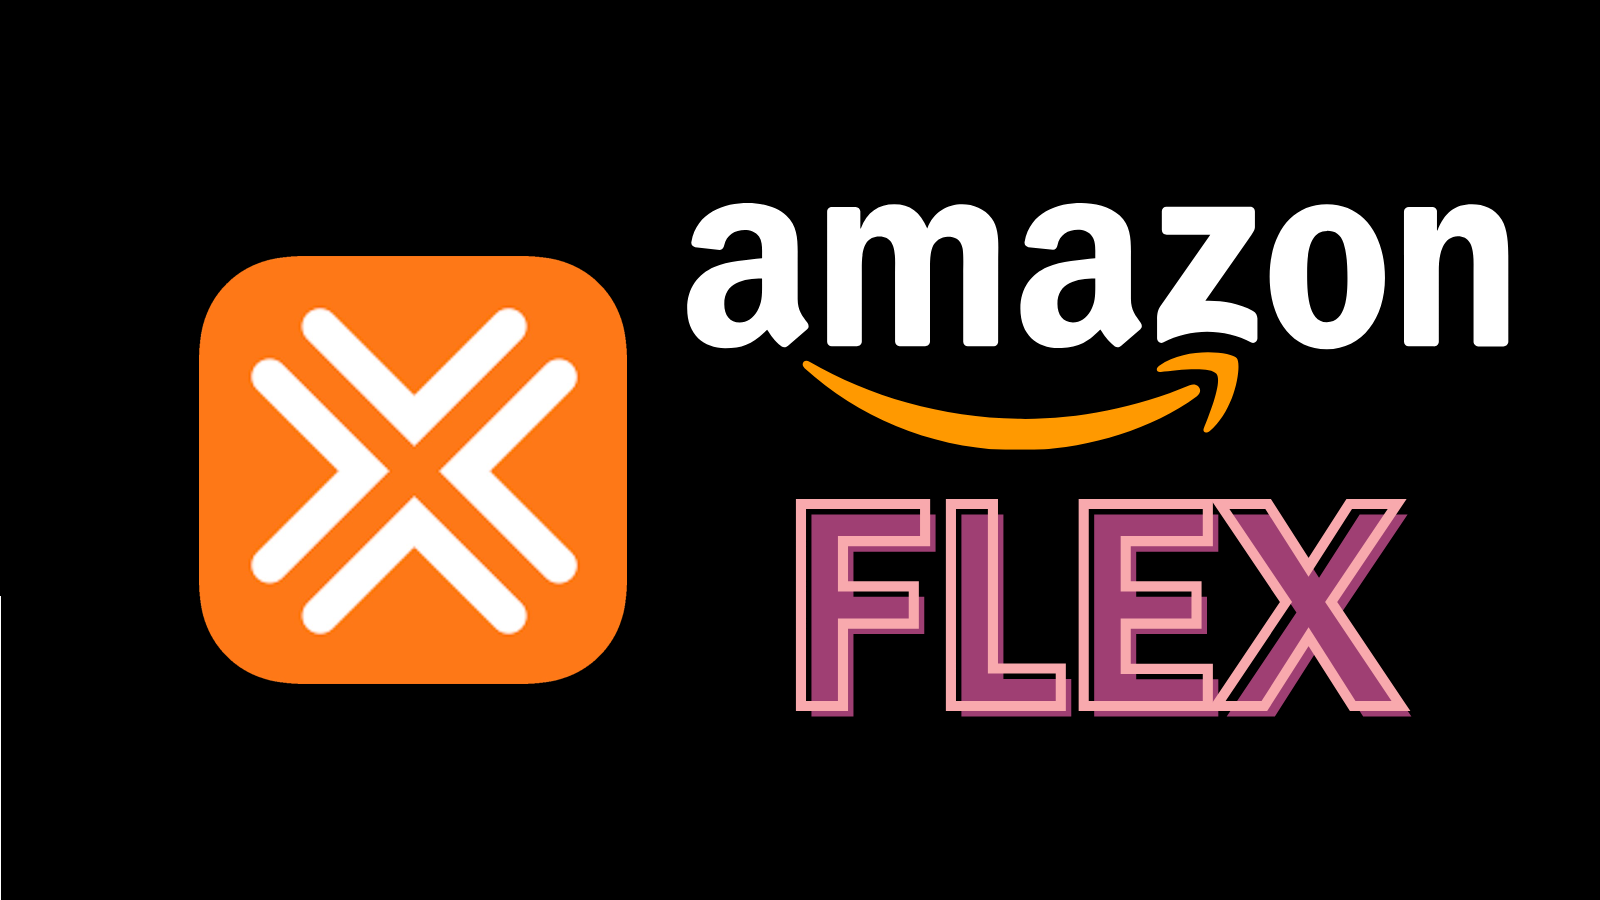 What Is Amazon Flex In 2022?